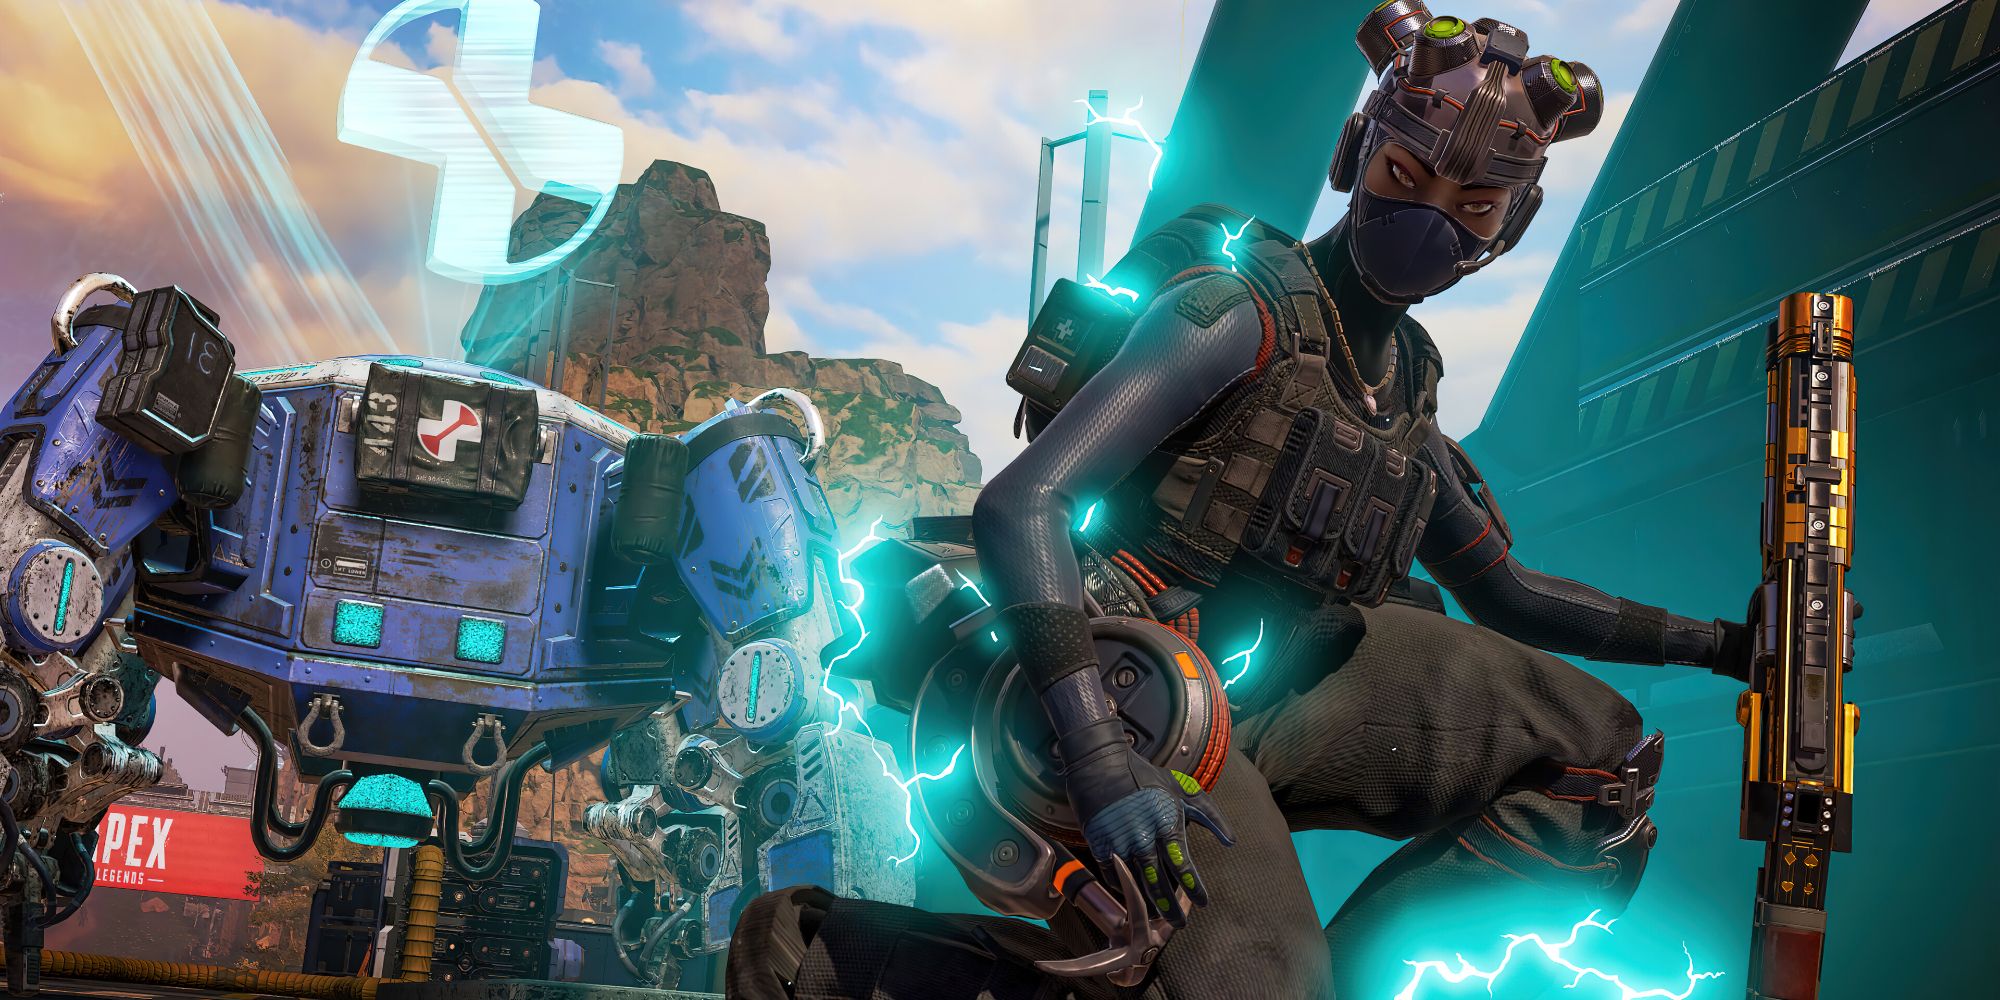 An image of Lifeline's Breach And Clear skin from Apex Legends